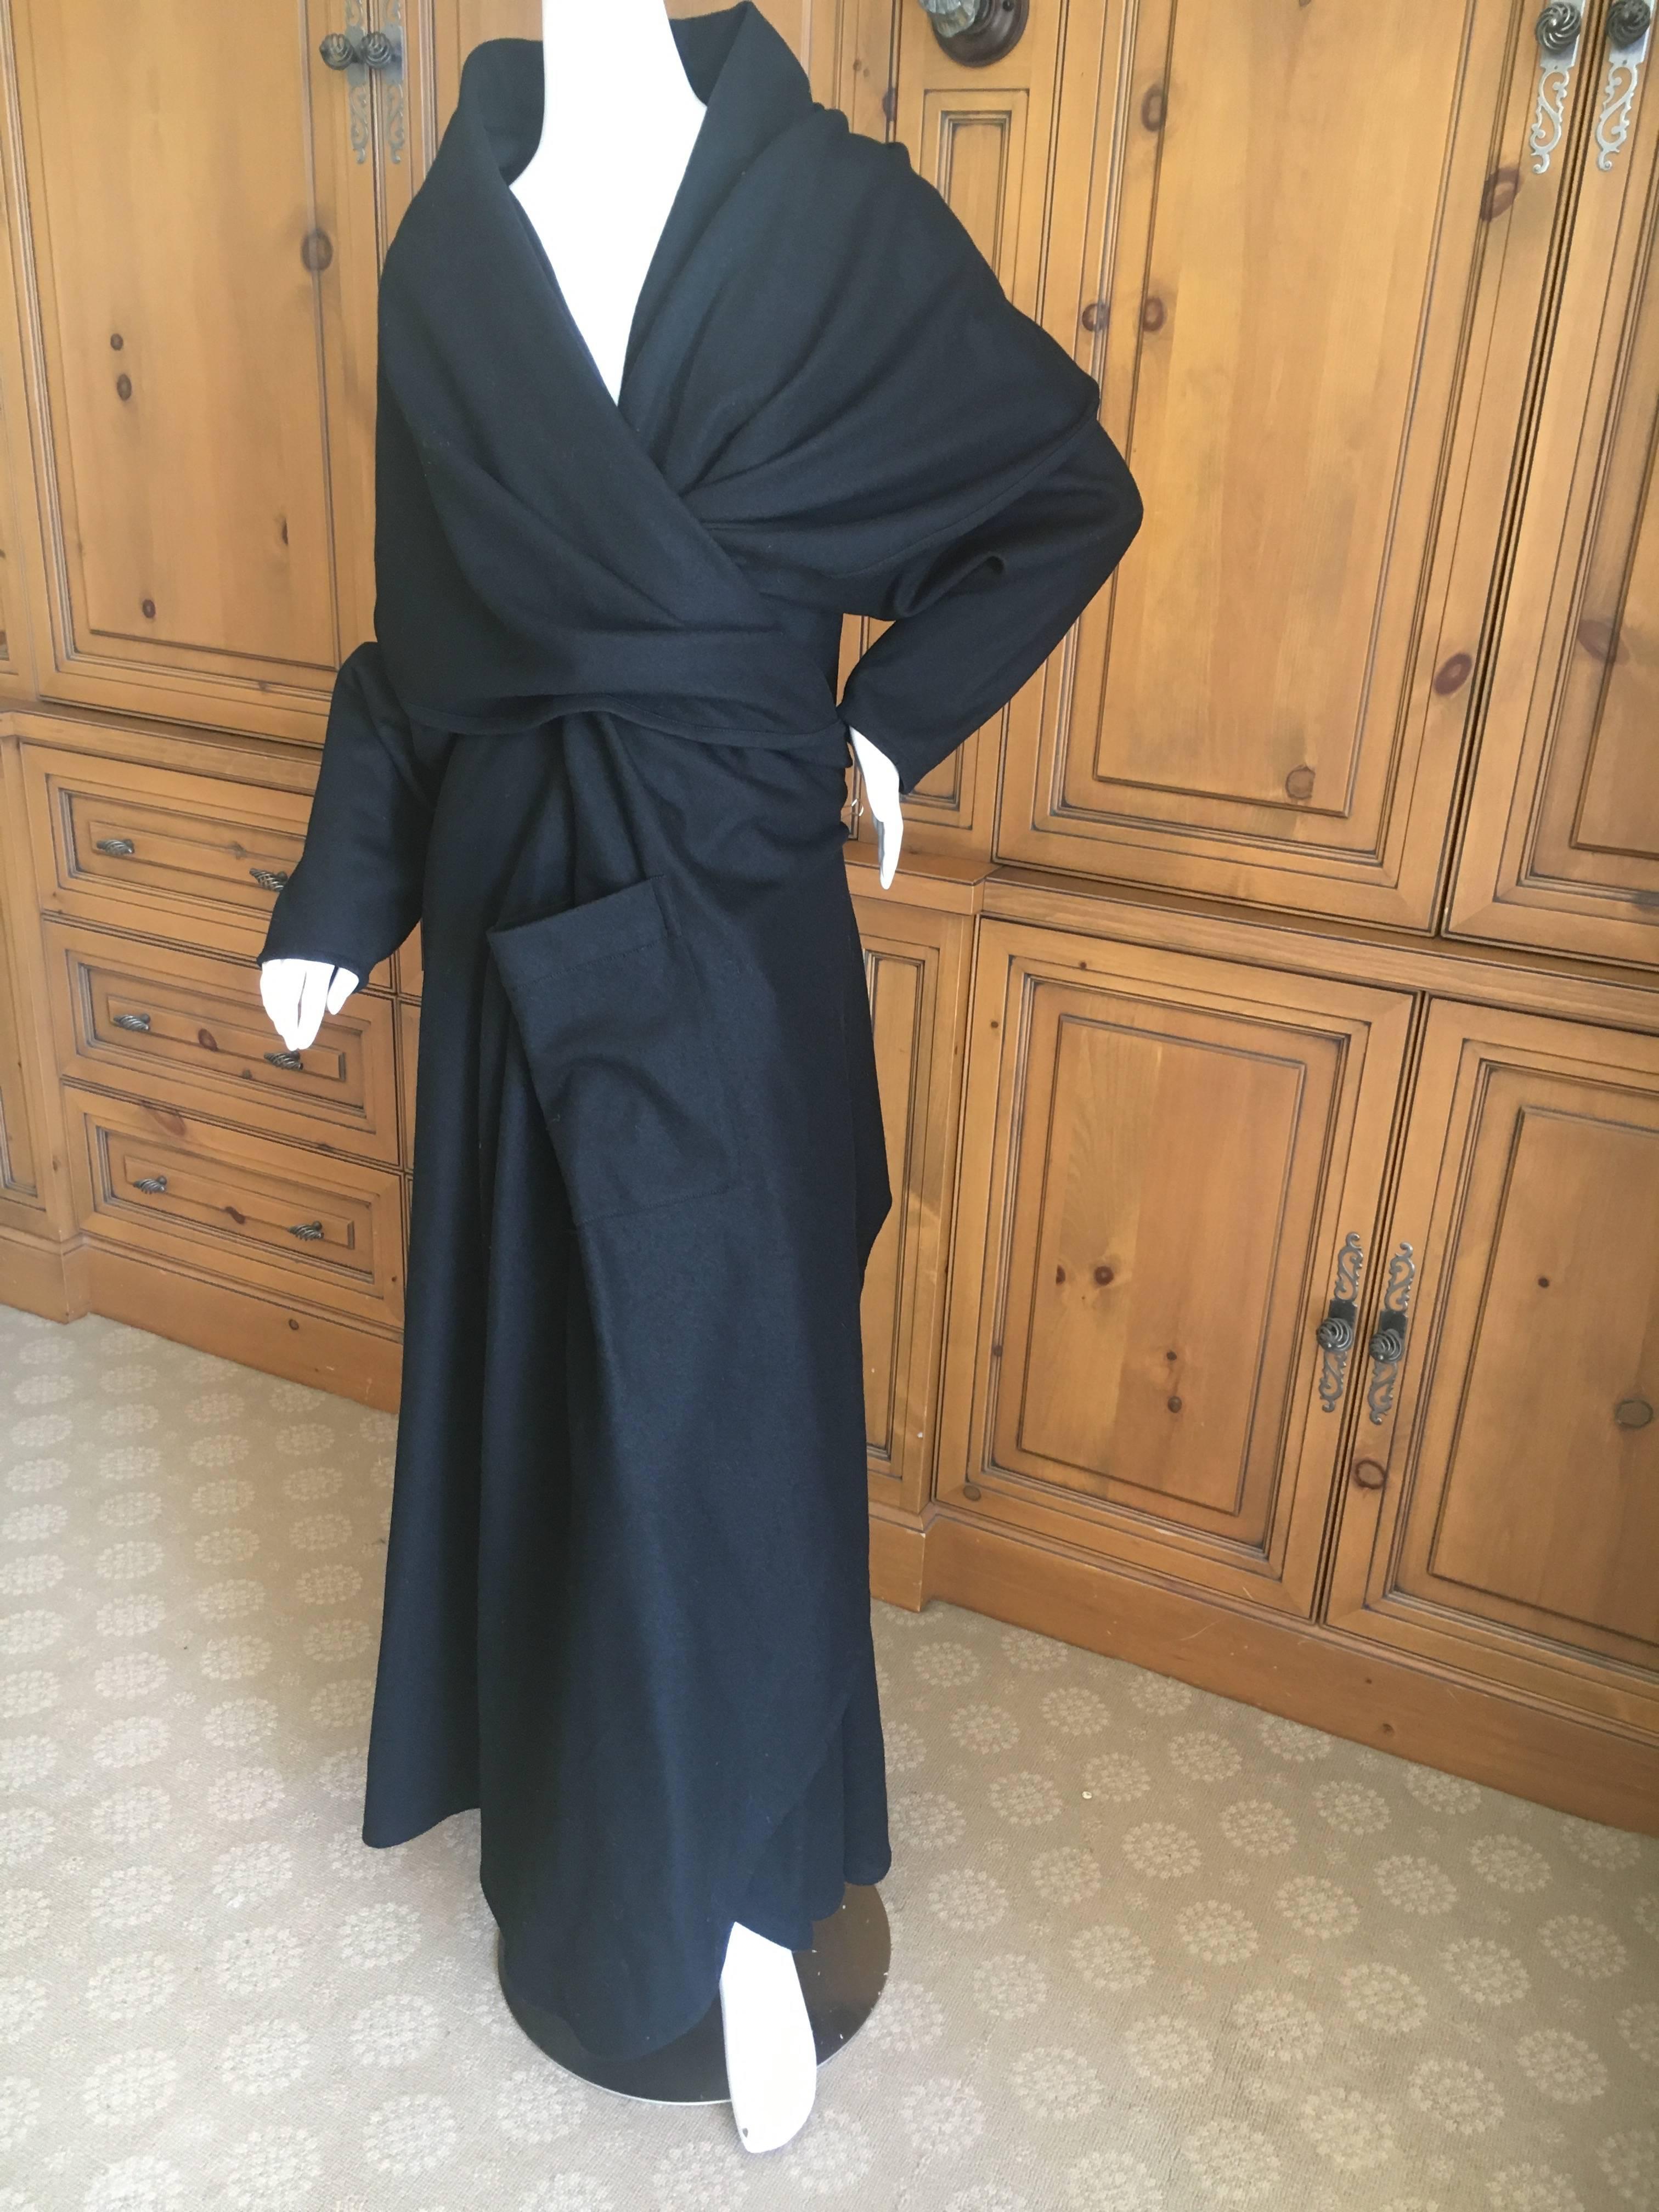 Women's or Men's Issey Miyake for Ultimo 1980's Voluminous Black Coat with Wide Collar / Cape For Sale